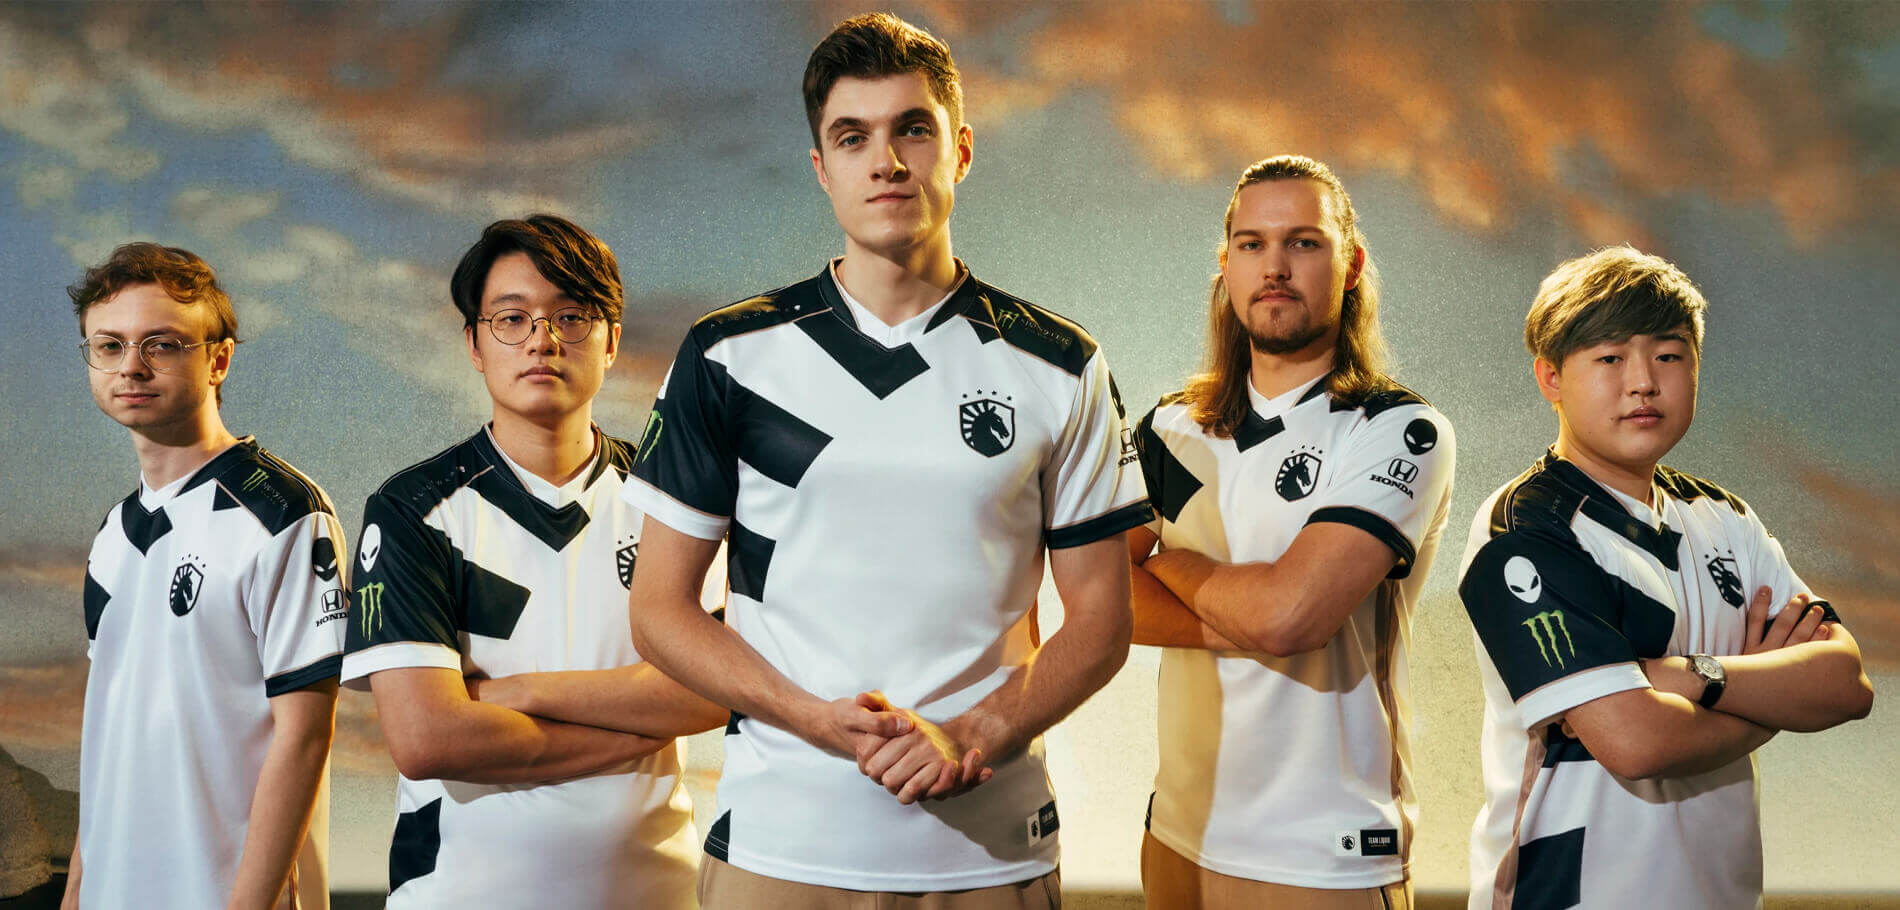 Team Liquid Worlds 2021 Jersey Collection The Gaming Wear